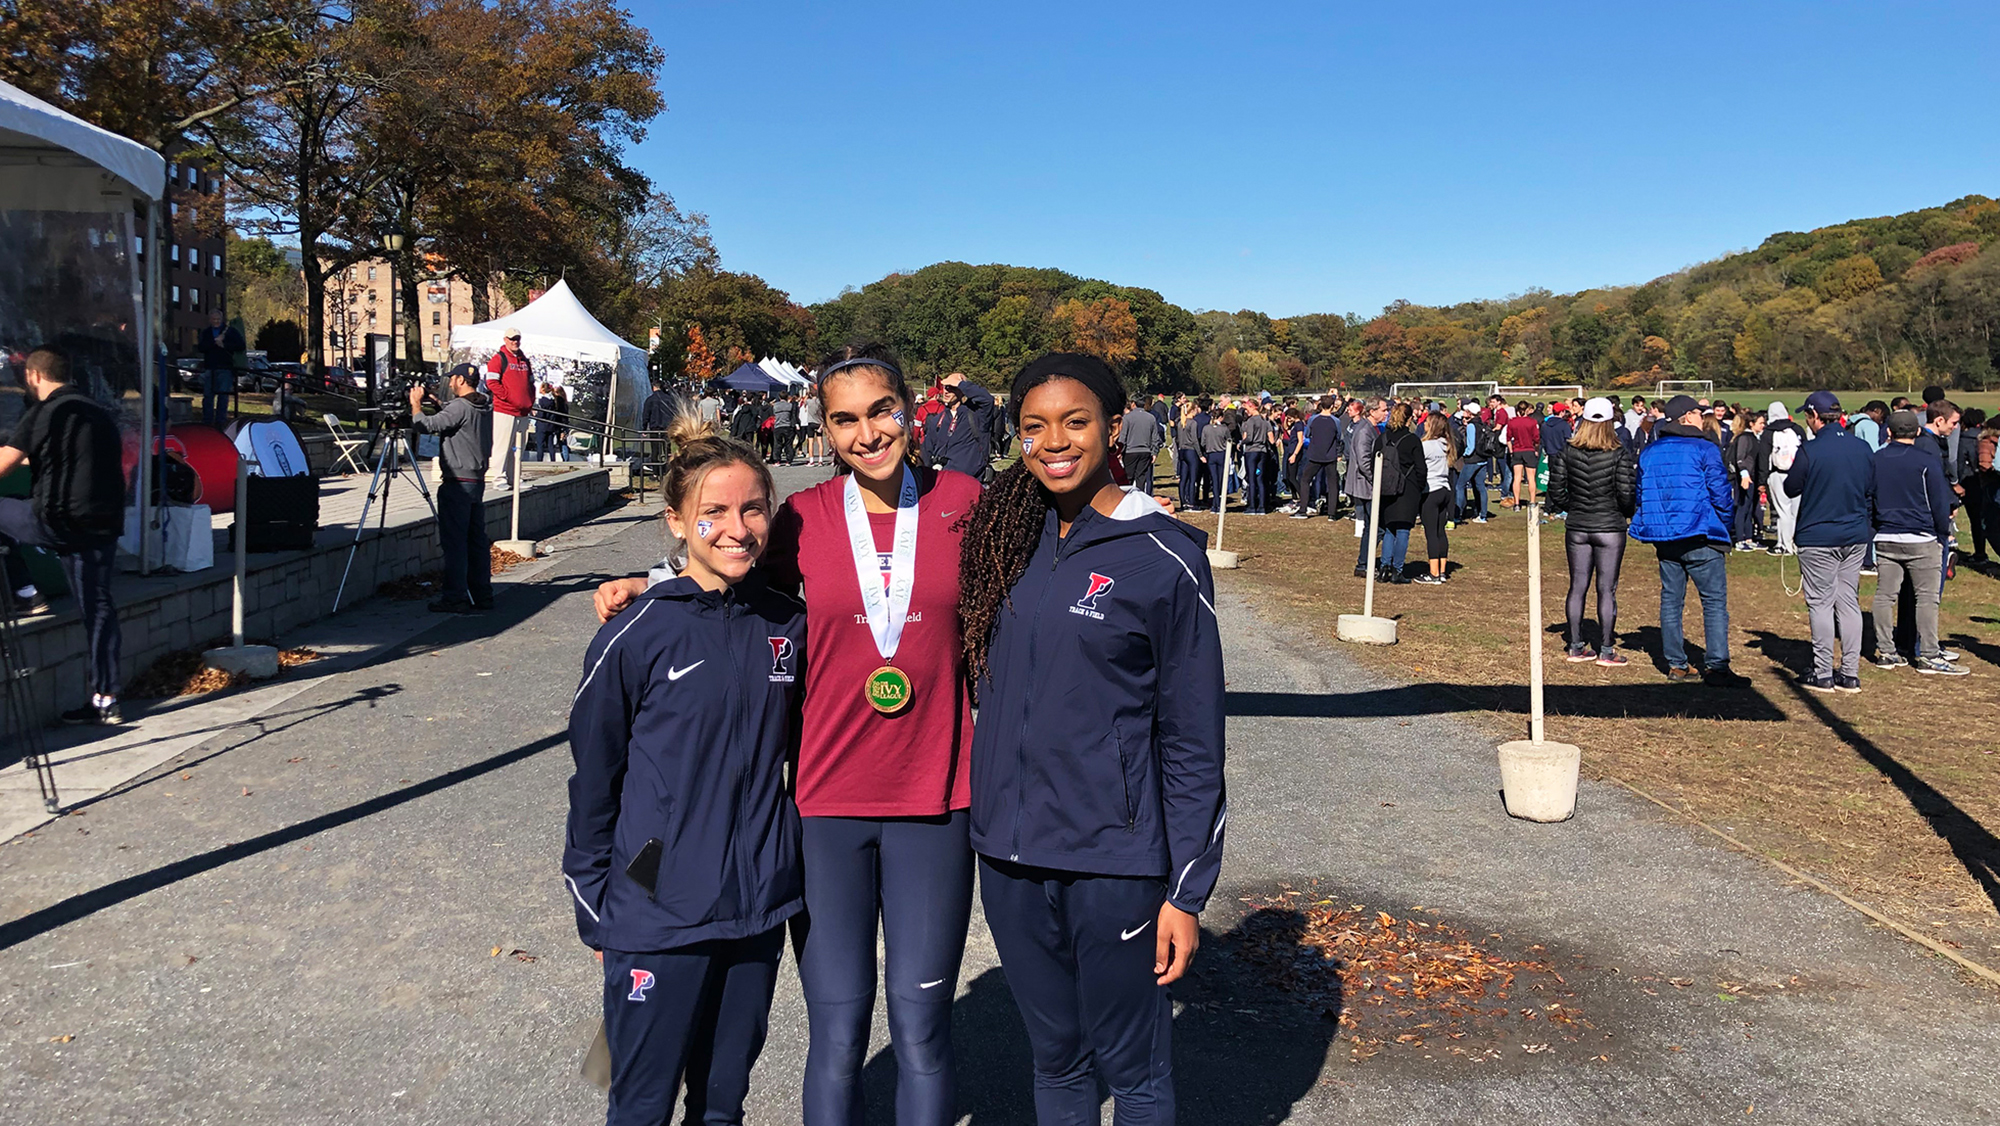 From left, Ariana Gardizy, Maddie Villalba, and Nia Akins of the women’s cross country team stand together at the Ivy Heps in the Bronx.  